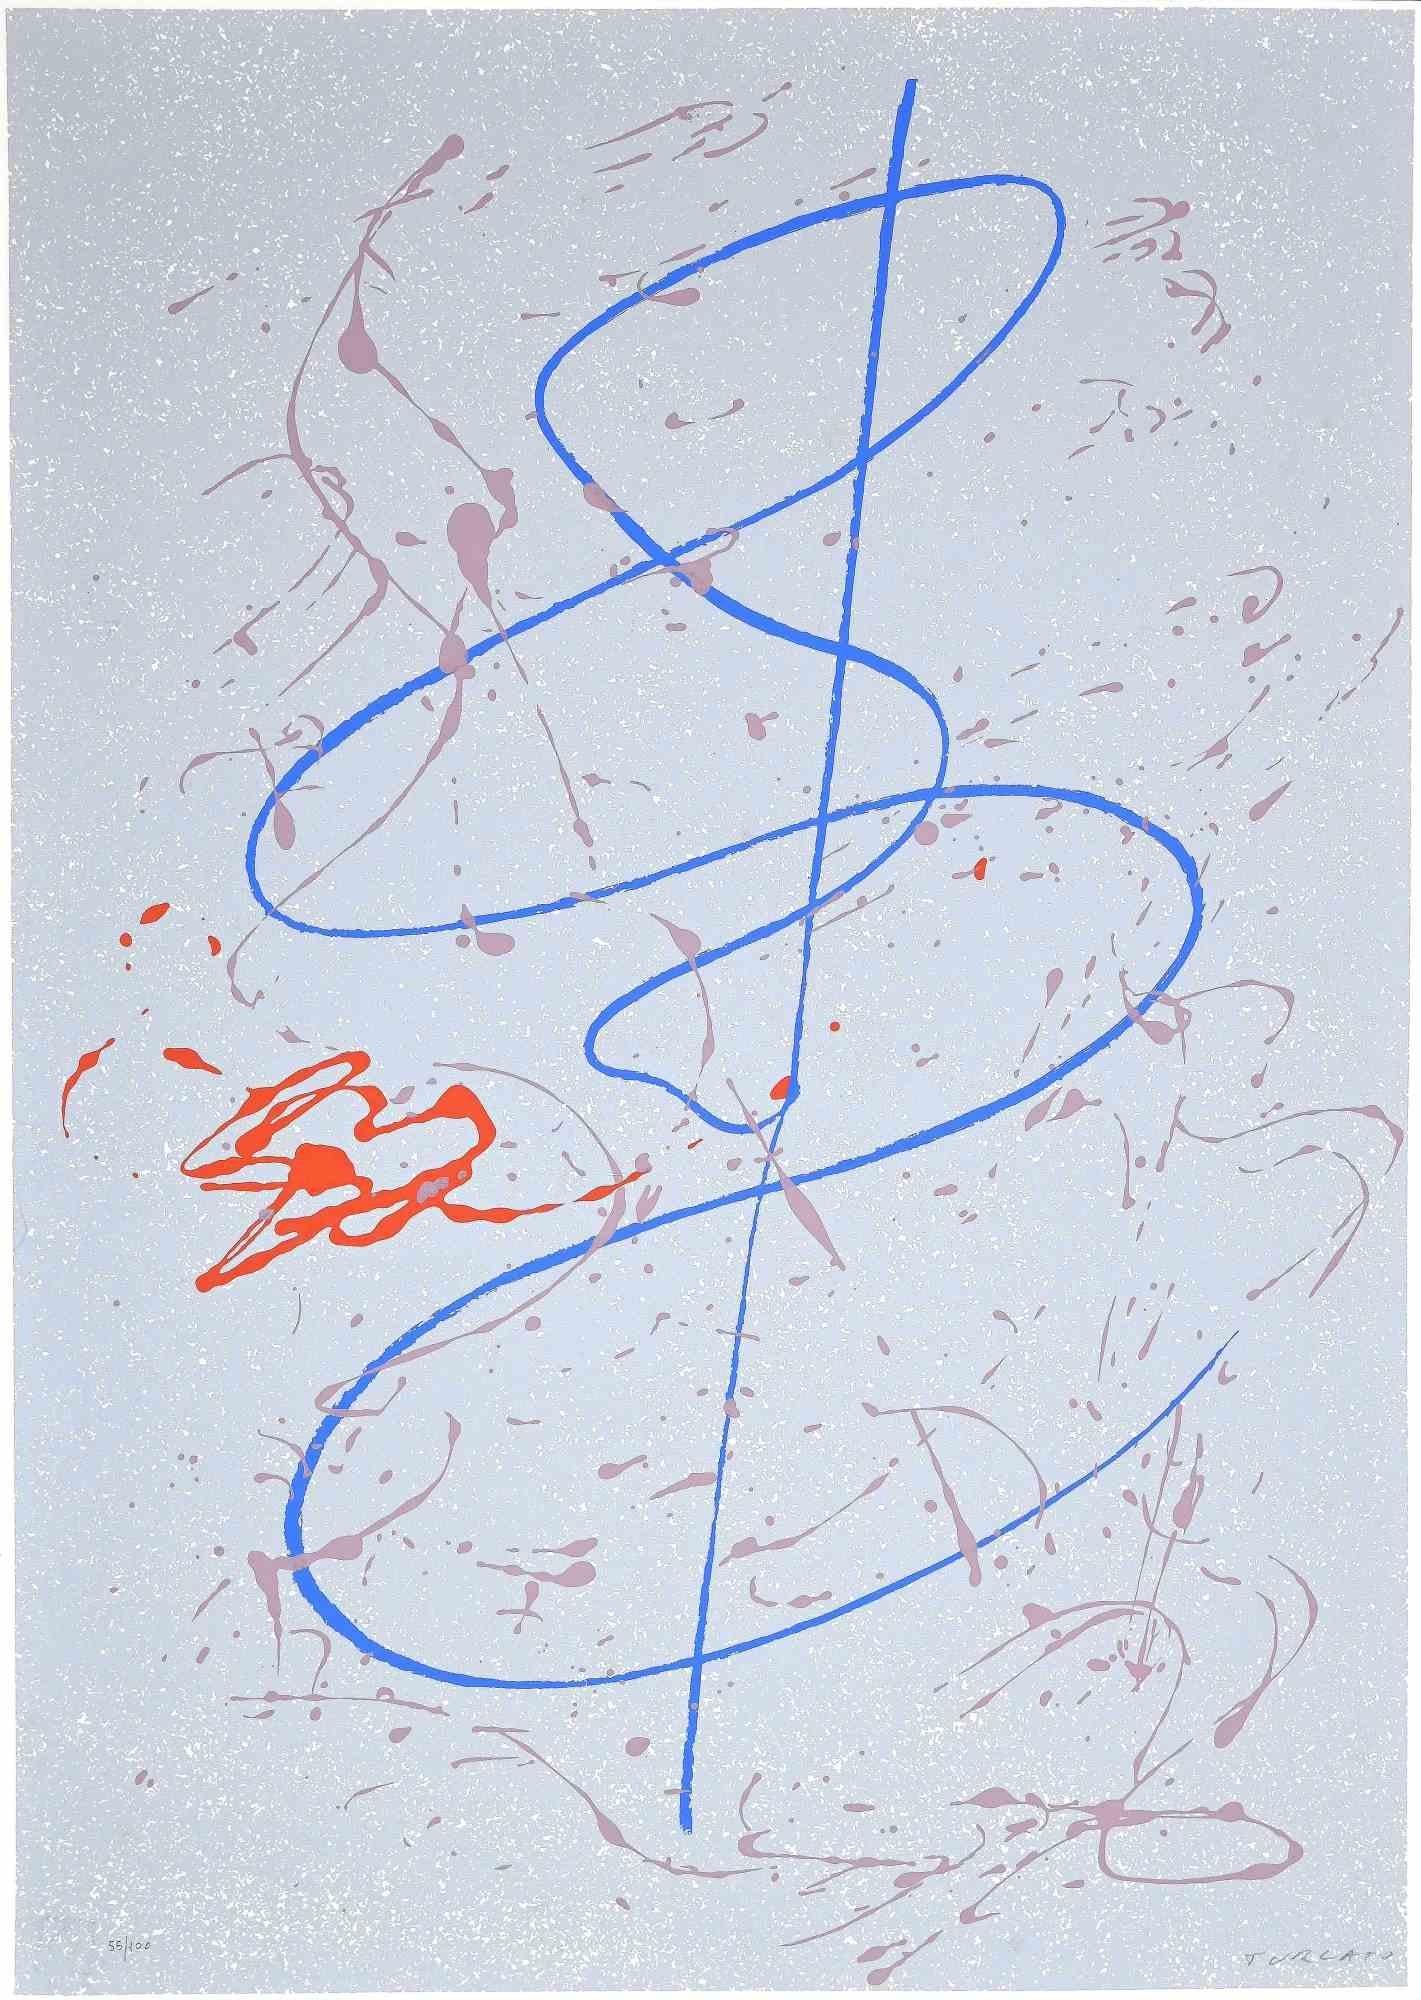 Abstract Composition is an original Contemporary Artwork realized in the 1970s by Giulio Turcato (Mantua, 1912 – Rome, 1995).

Original B/W Lithgraph on paper.

Hand-signed in pencil by the artist on the lower right corner: Turcato. Numbered in